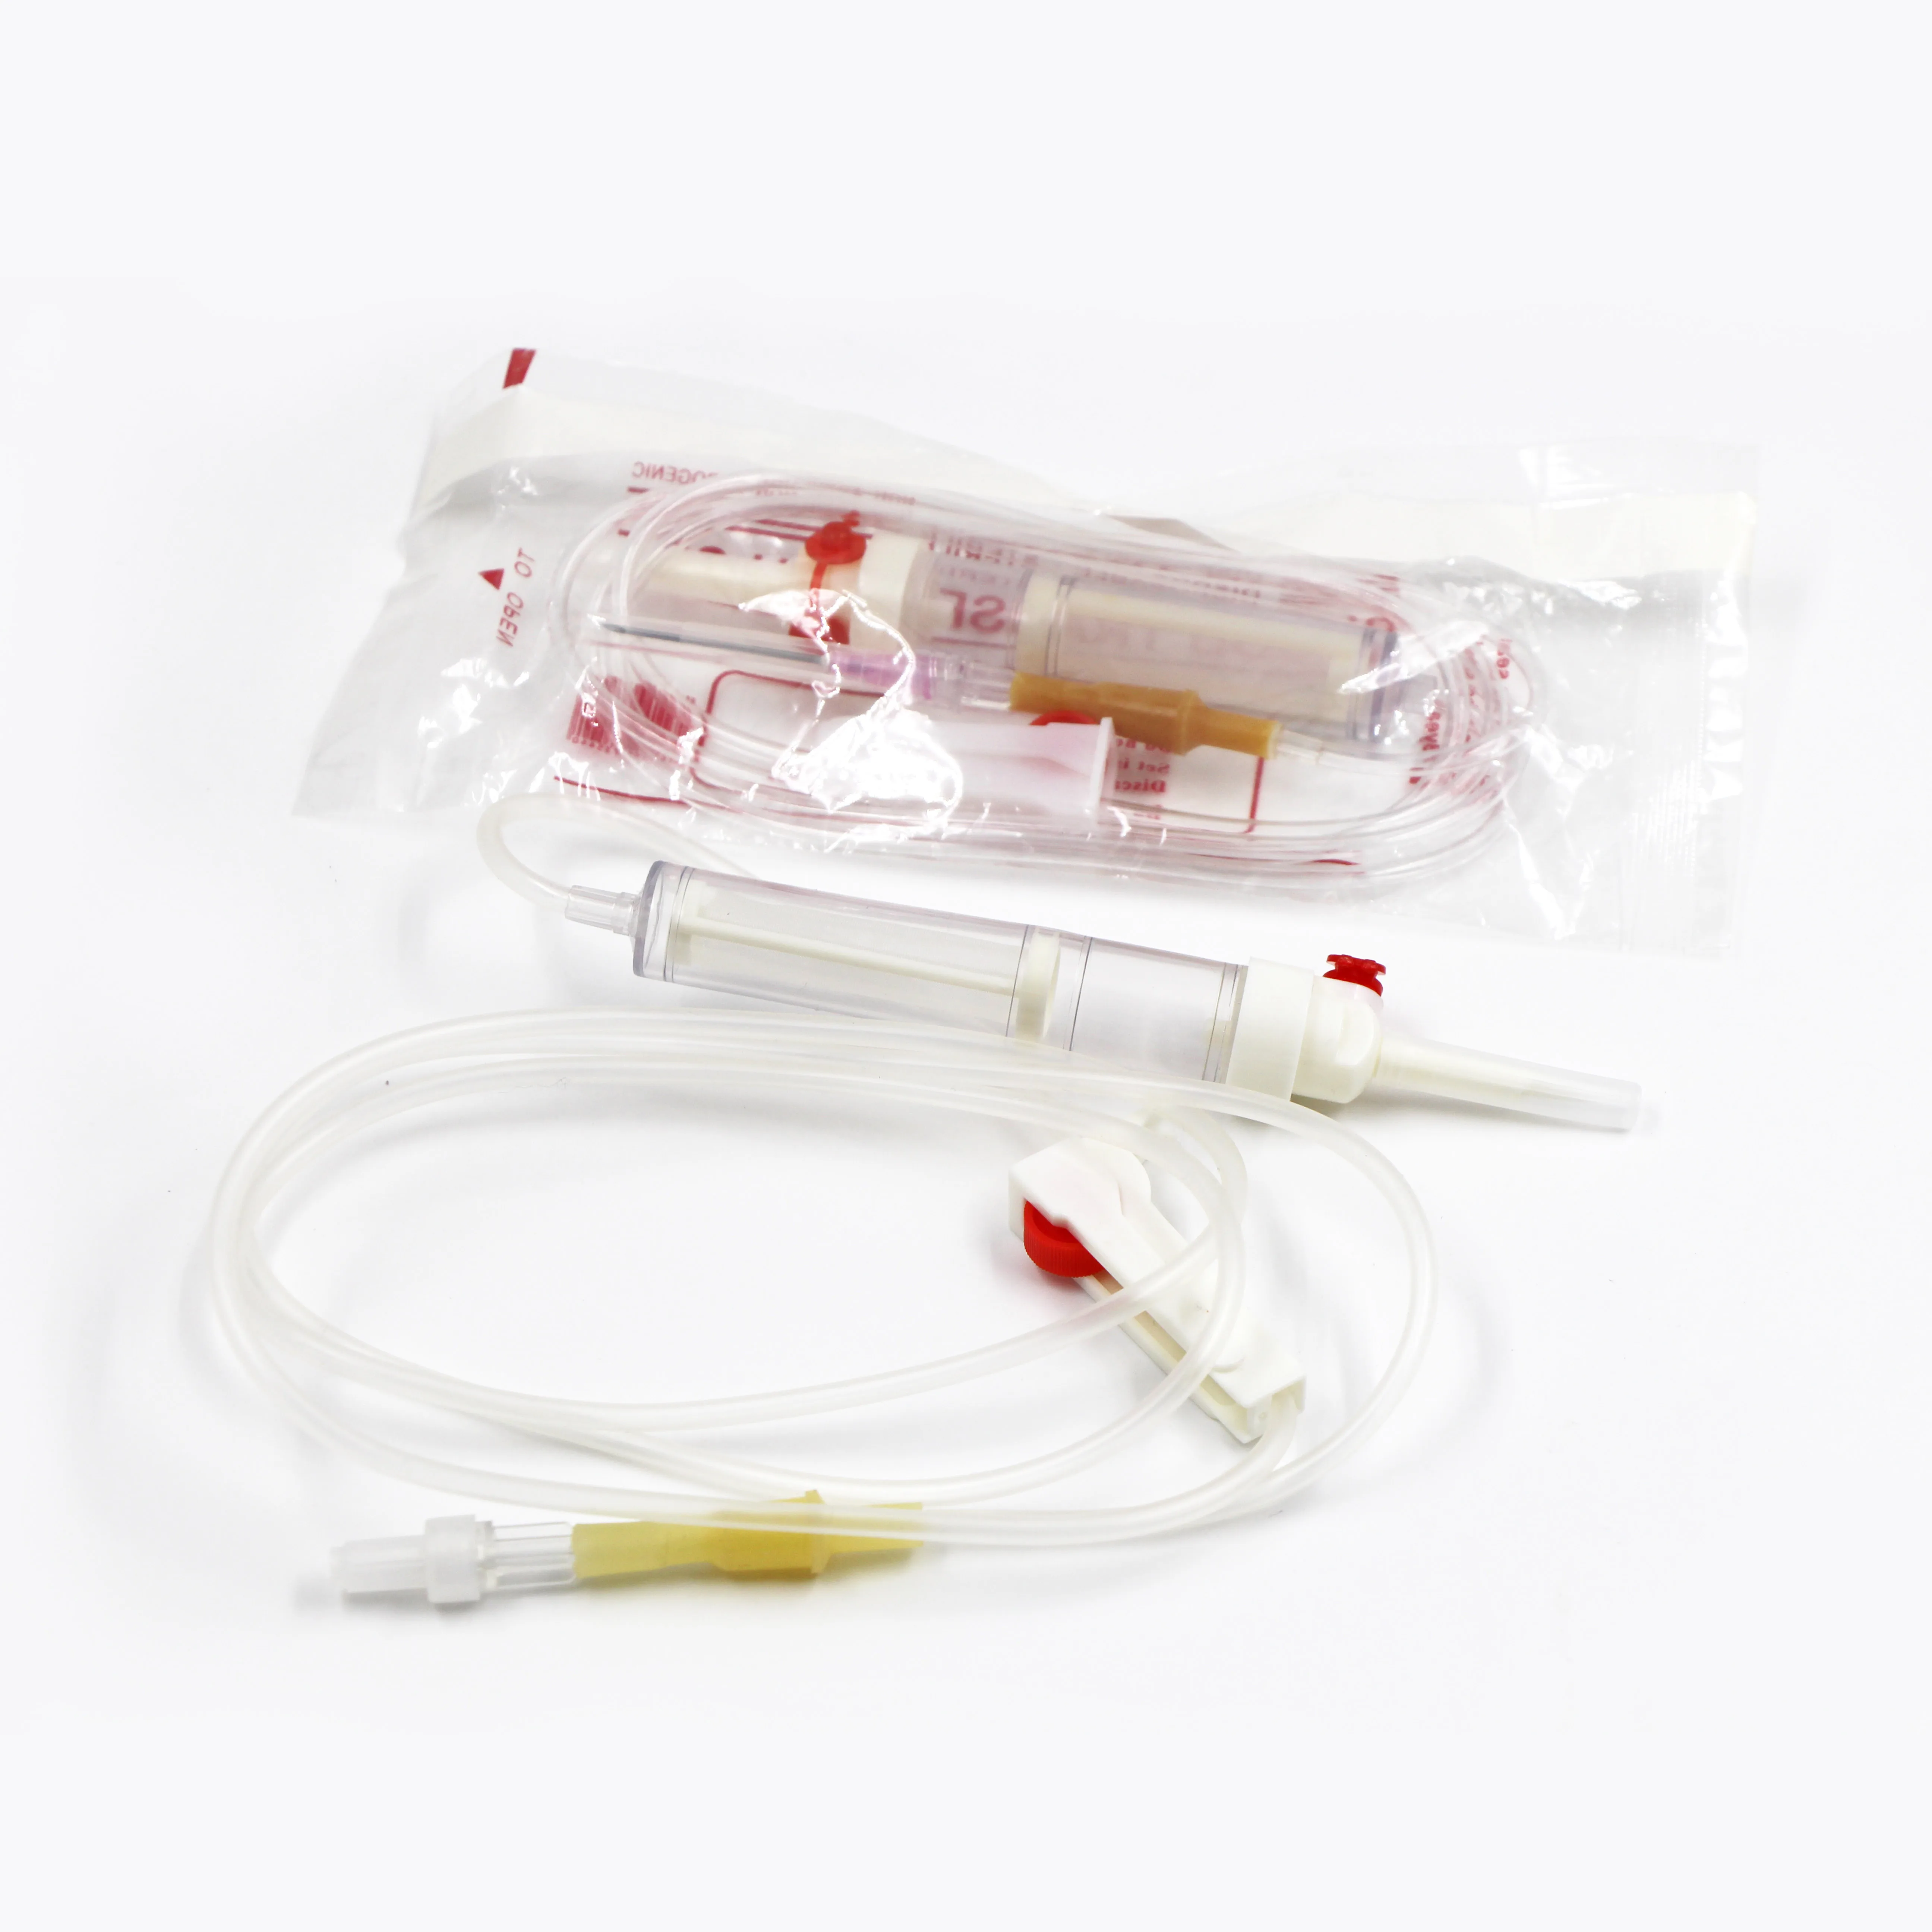 
Disposable sterile blood transfusion set with filter 